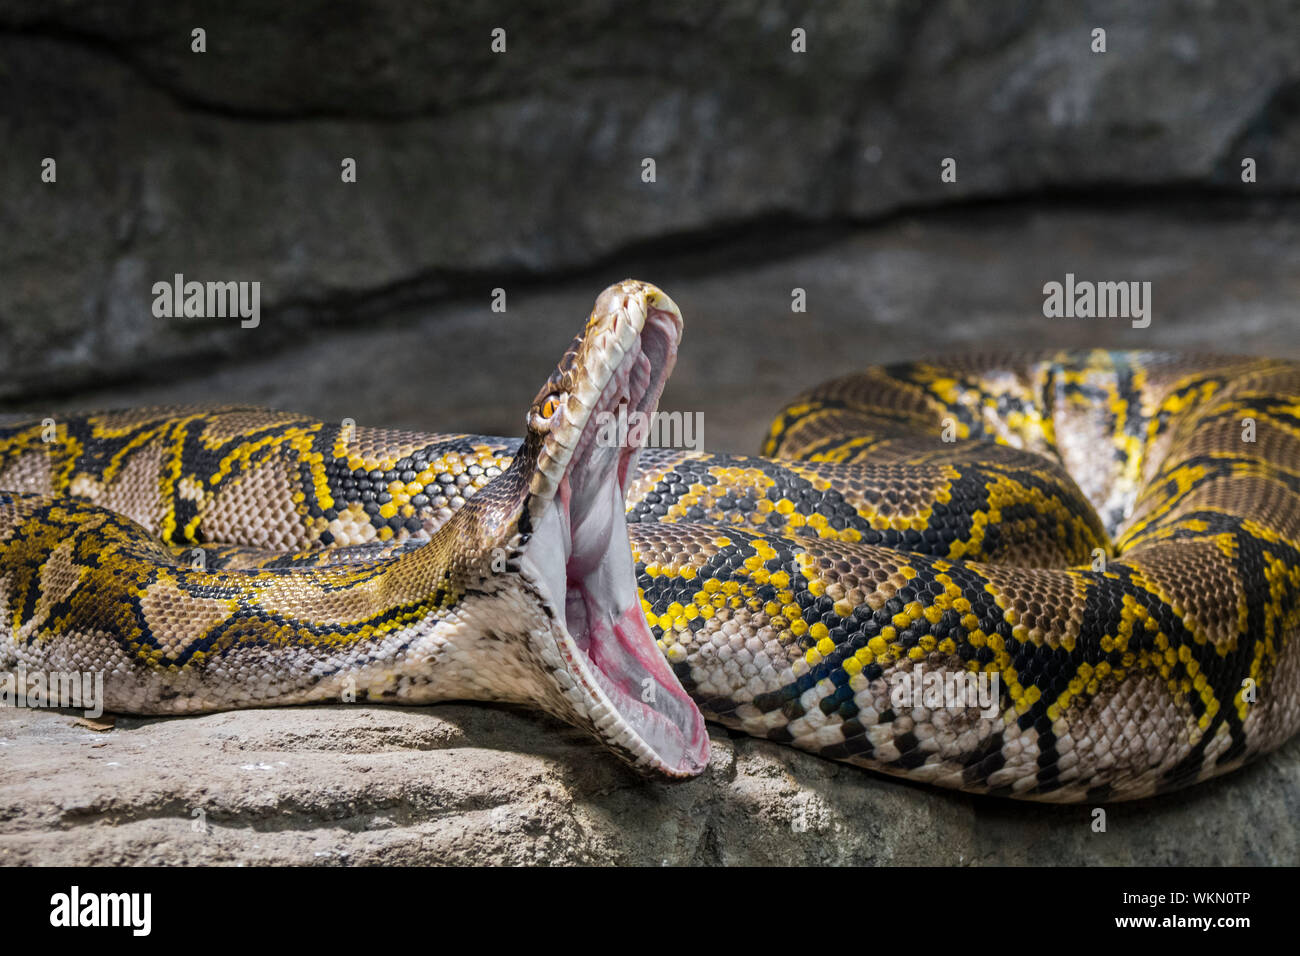 Reticulated python (Malayopython reticulatus / Python reticulatus) nonvenomous constrictor snake native to South / Southeast Asia with wide open mouth Stock Photo